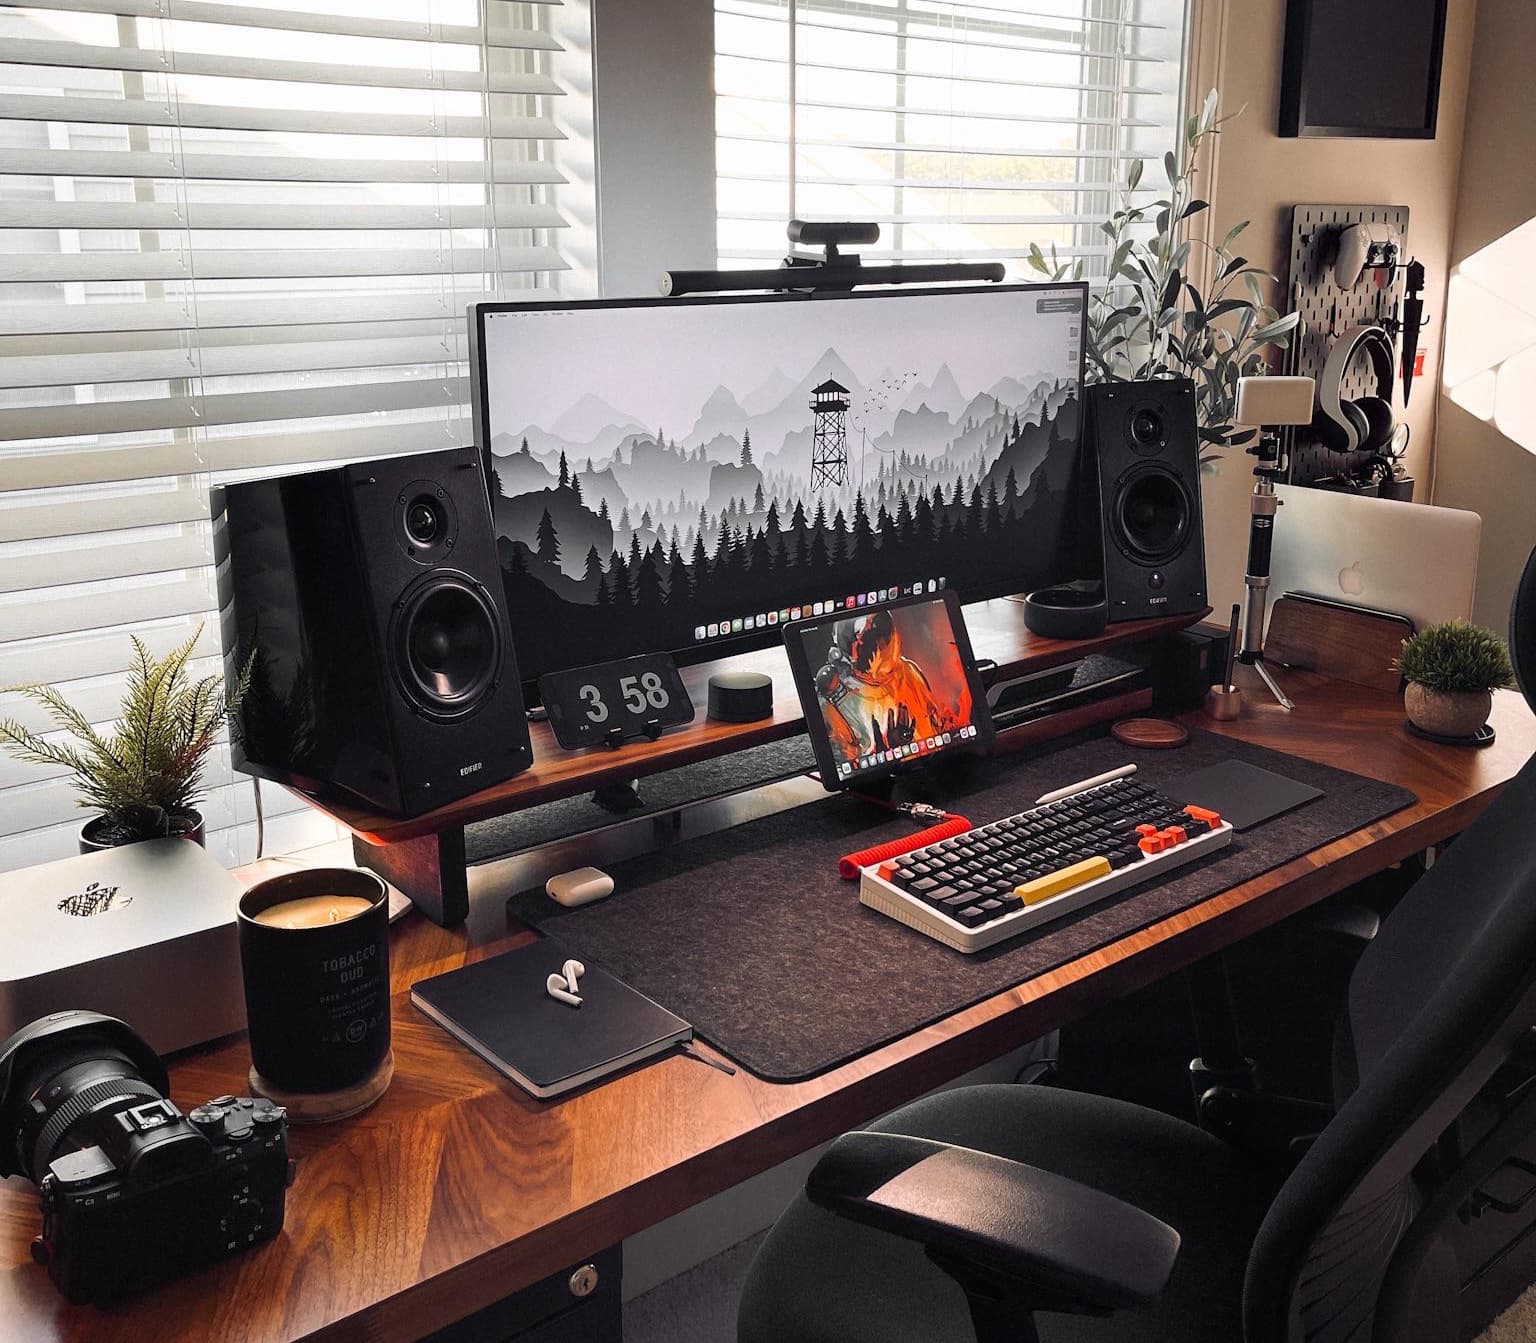 This great-looking setup relies on Mac Studio, MacBook Pro, iPad Pro and a PC.